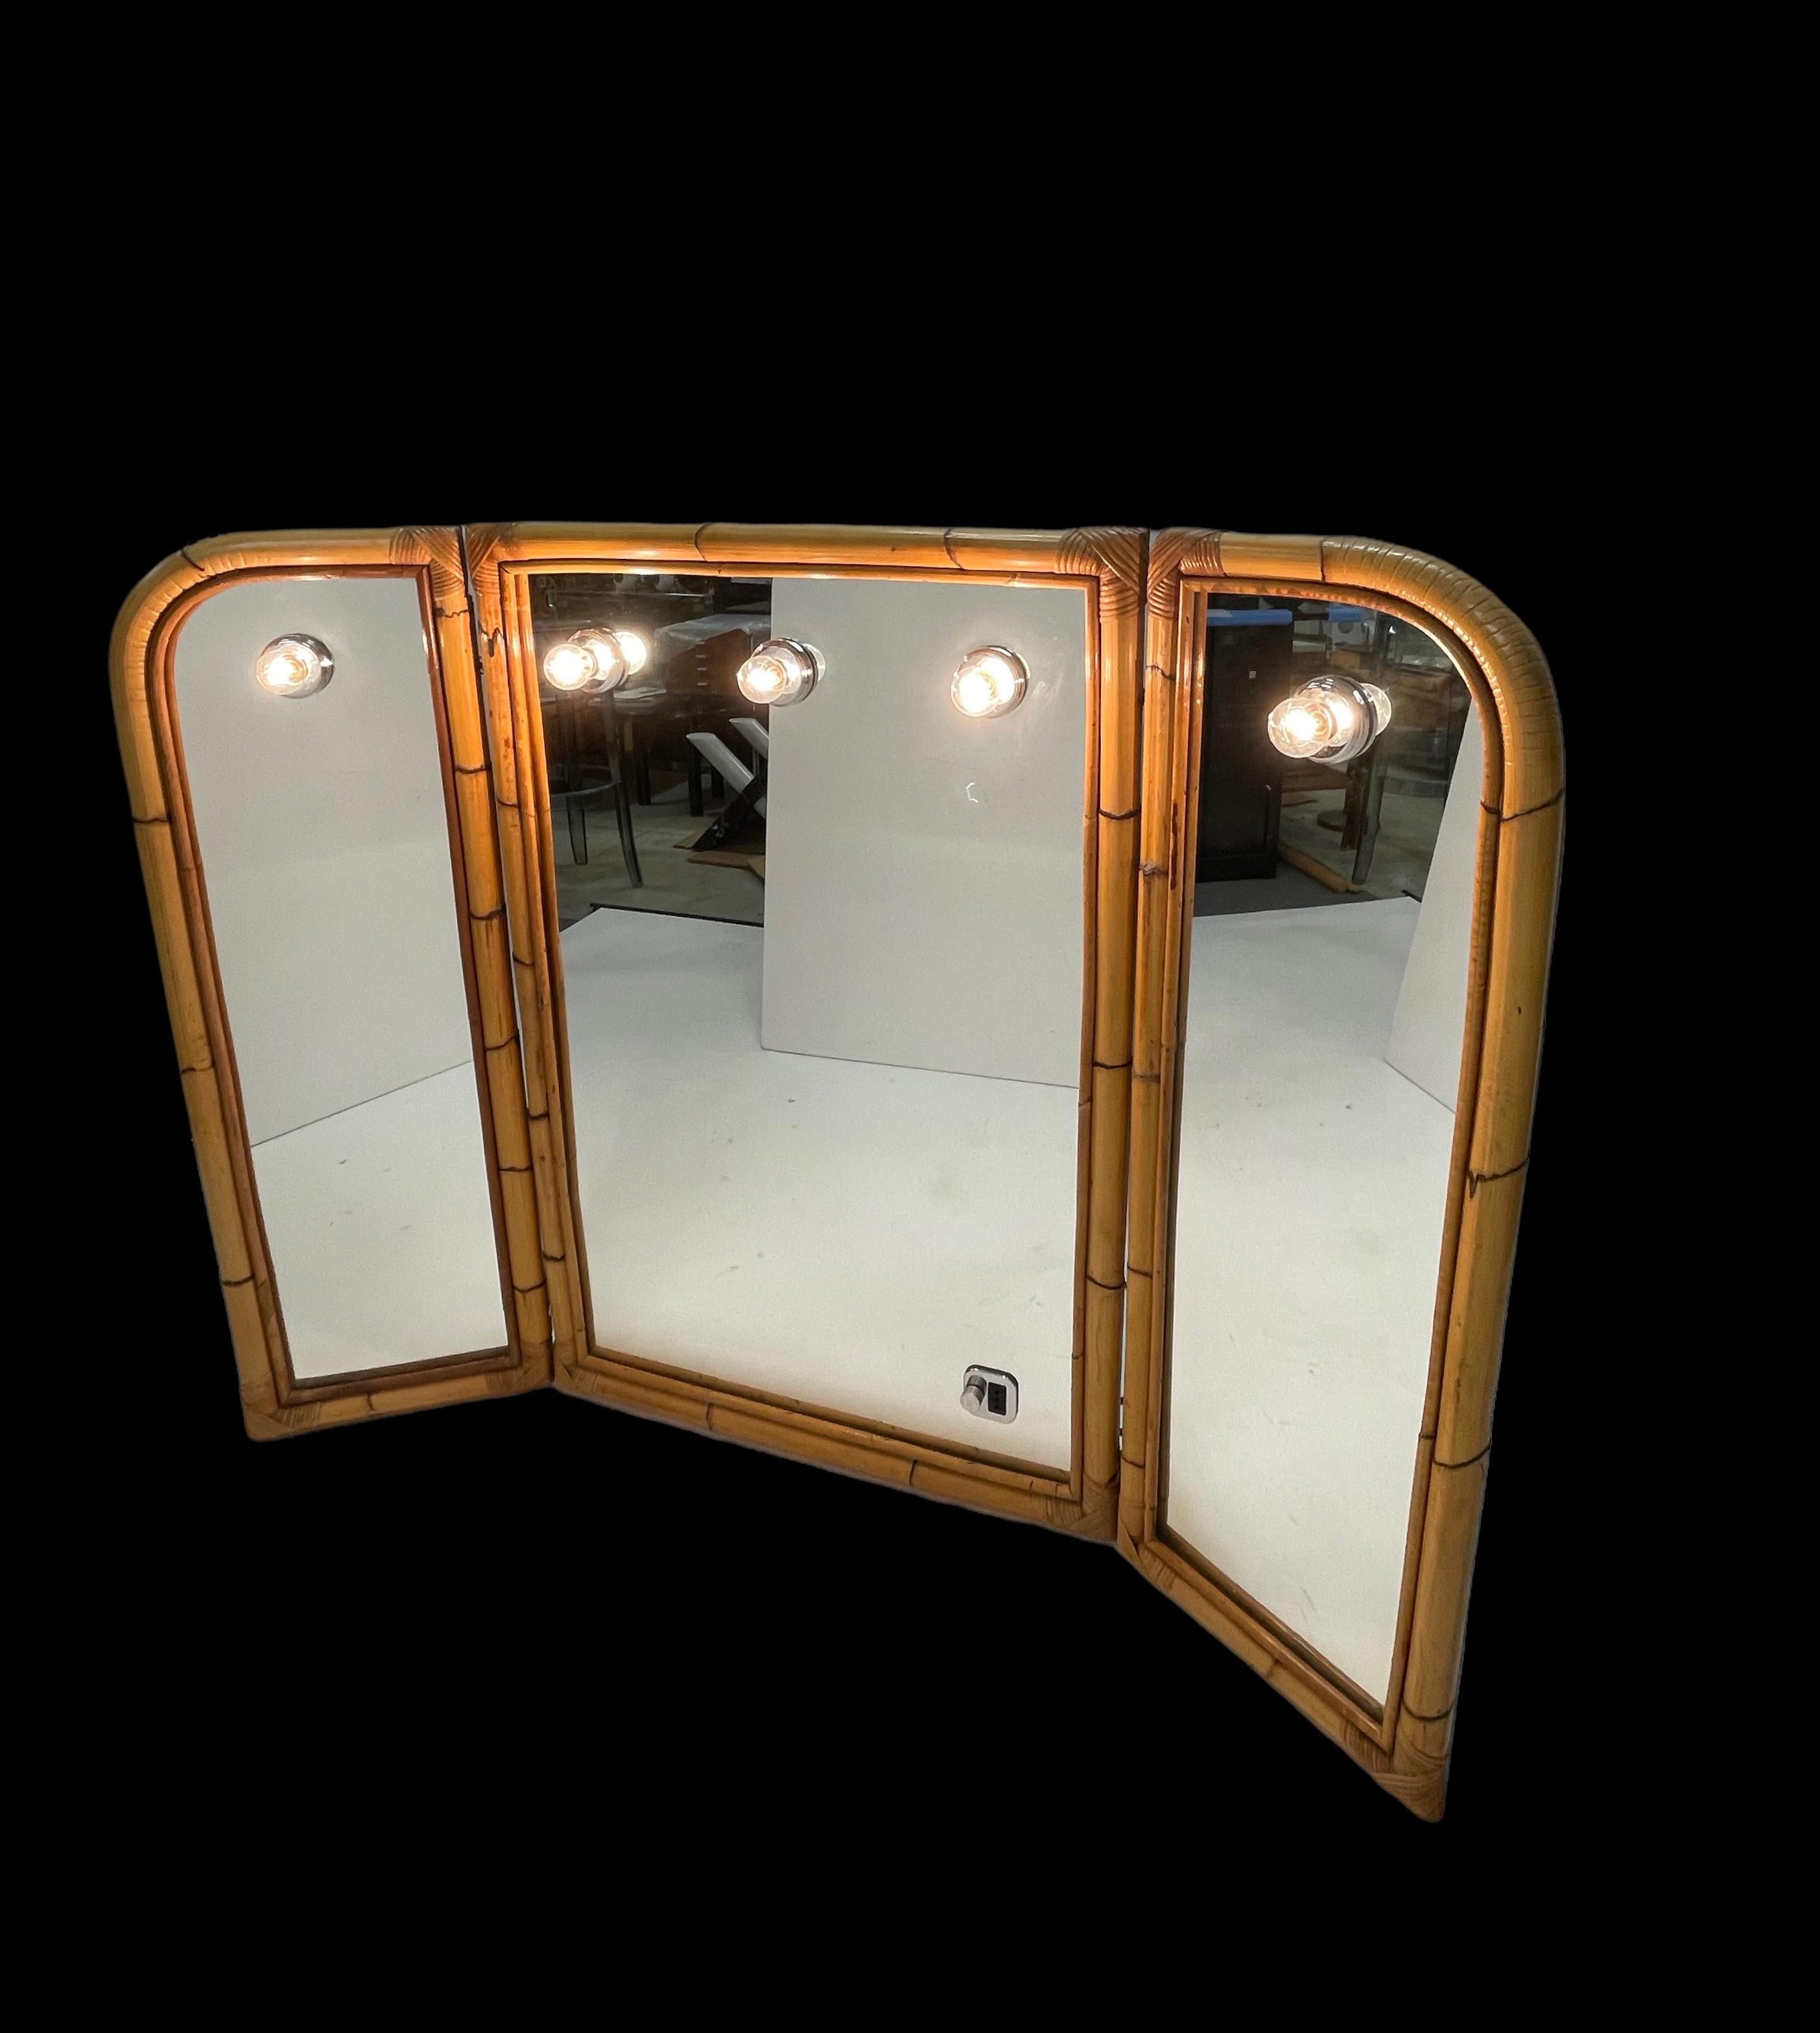 Midcentury Italian Triple Folding Bamboo Mirror with Dimmable Lighting, 1970s For Sale 2